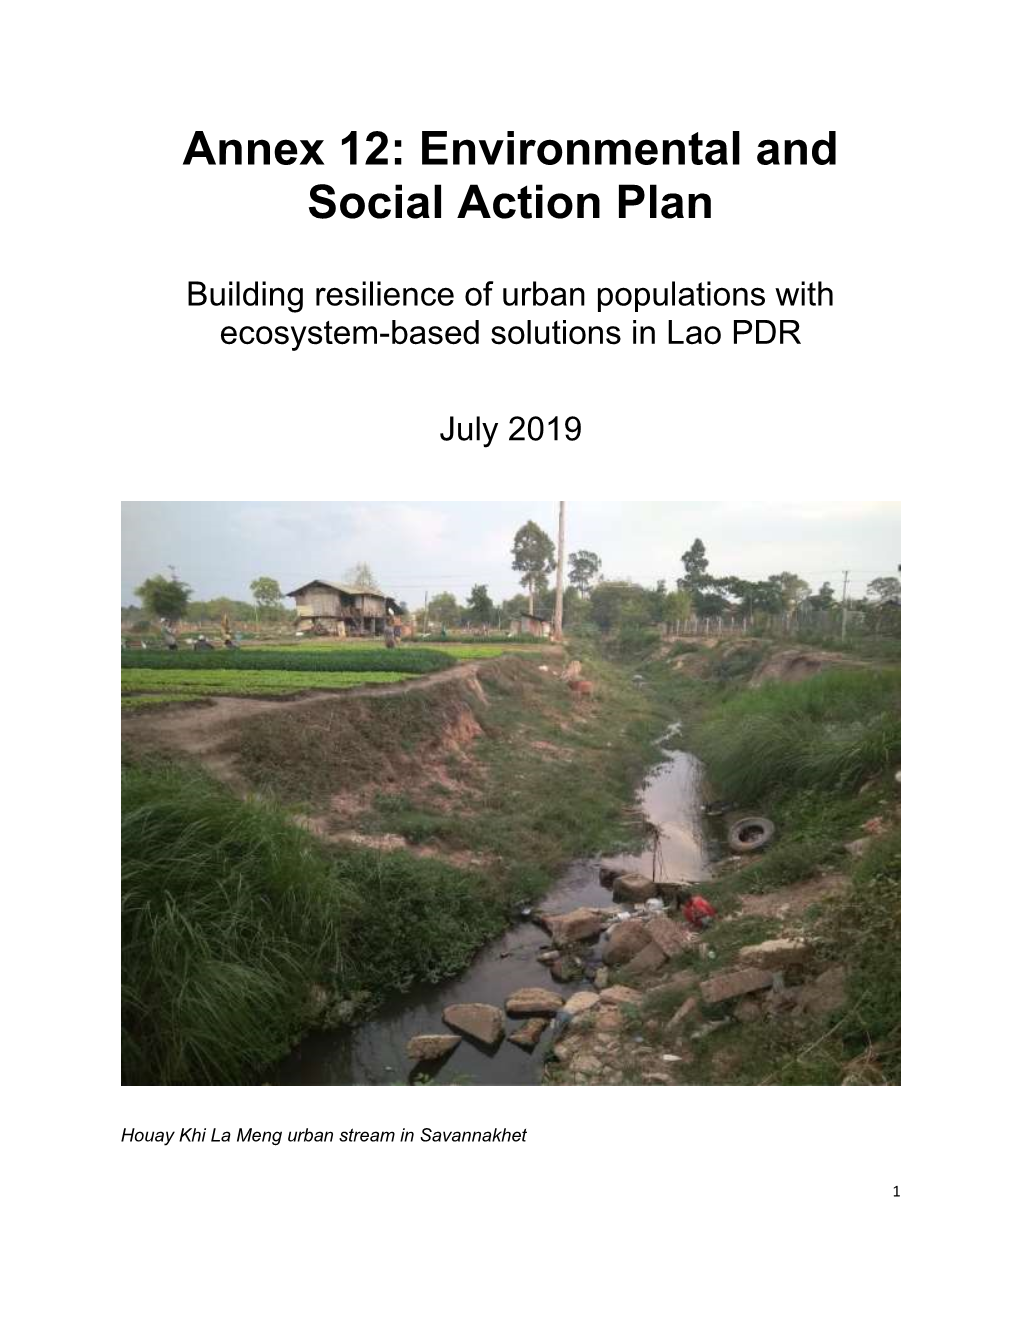 Annex 12: Environmental and Social Action Plan